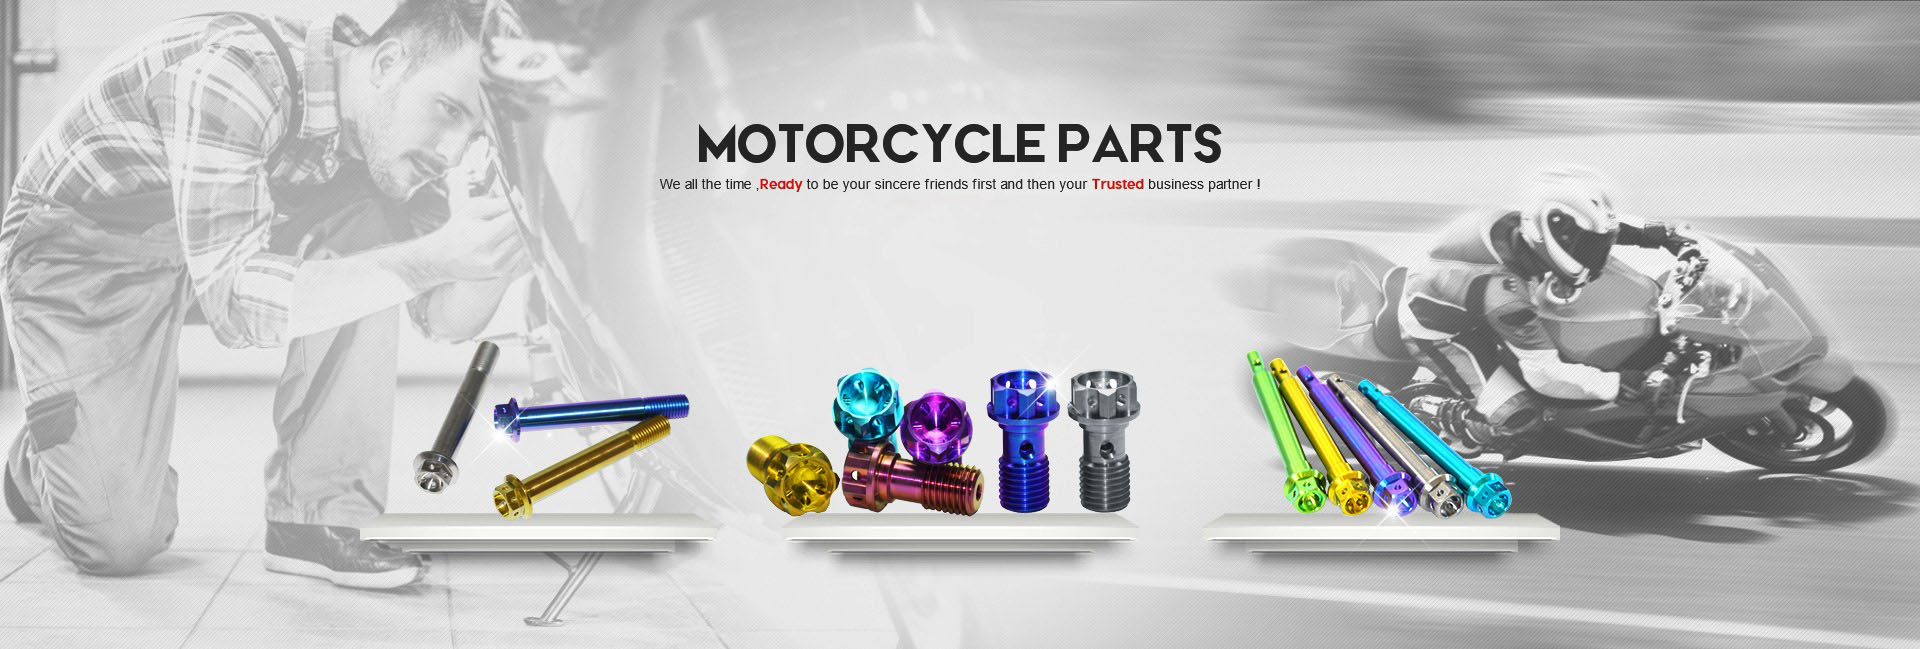 Titanium alloy parts for motorcycles